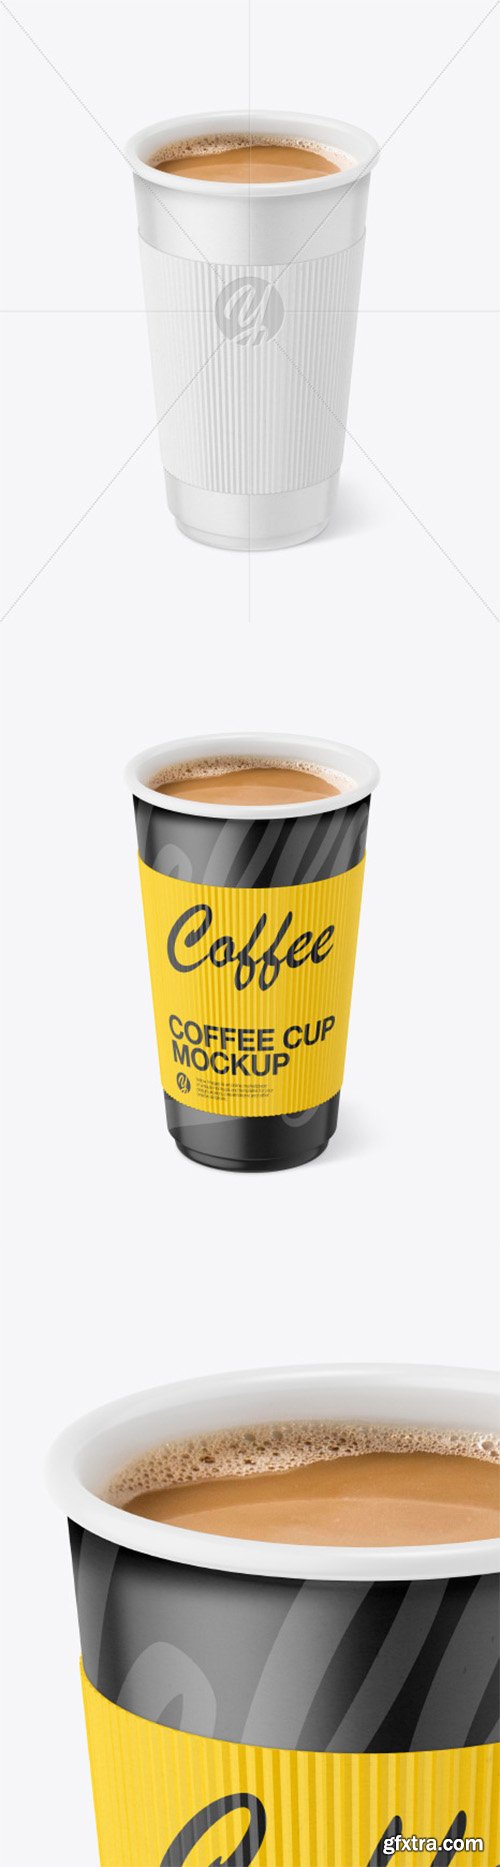 Paper Coffee Cup With Holder Mockup 78693